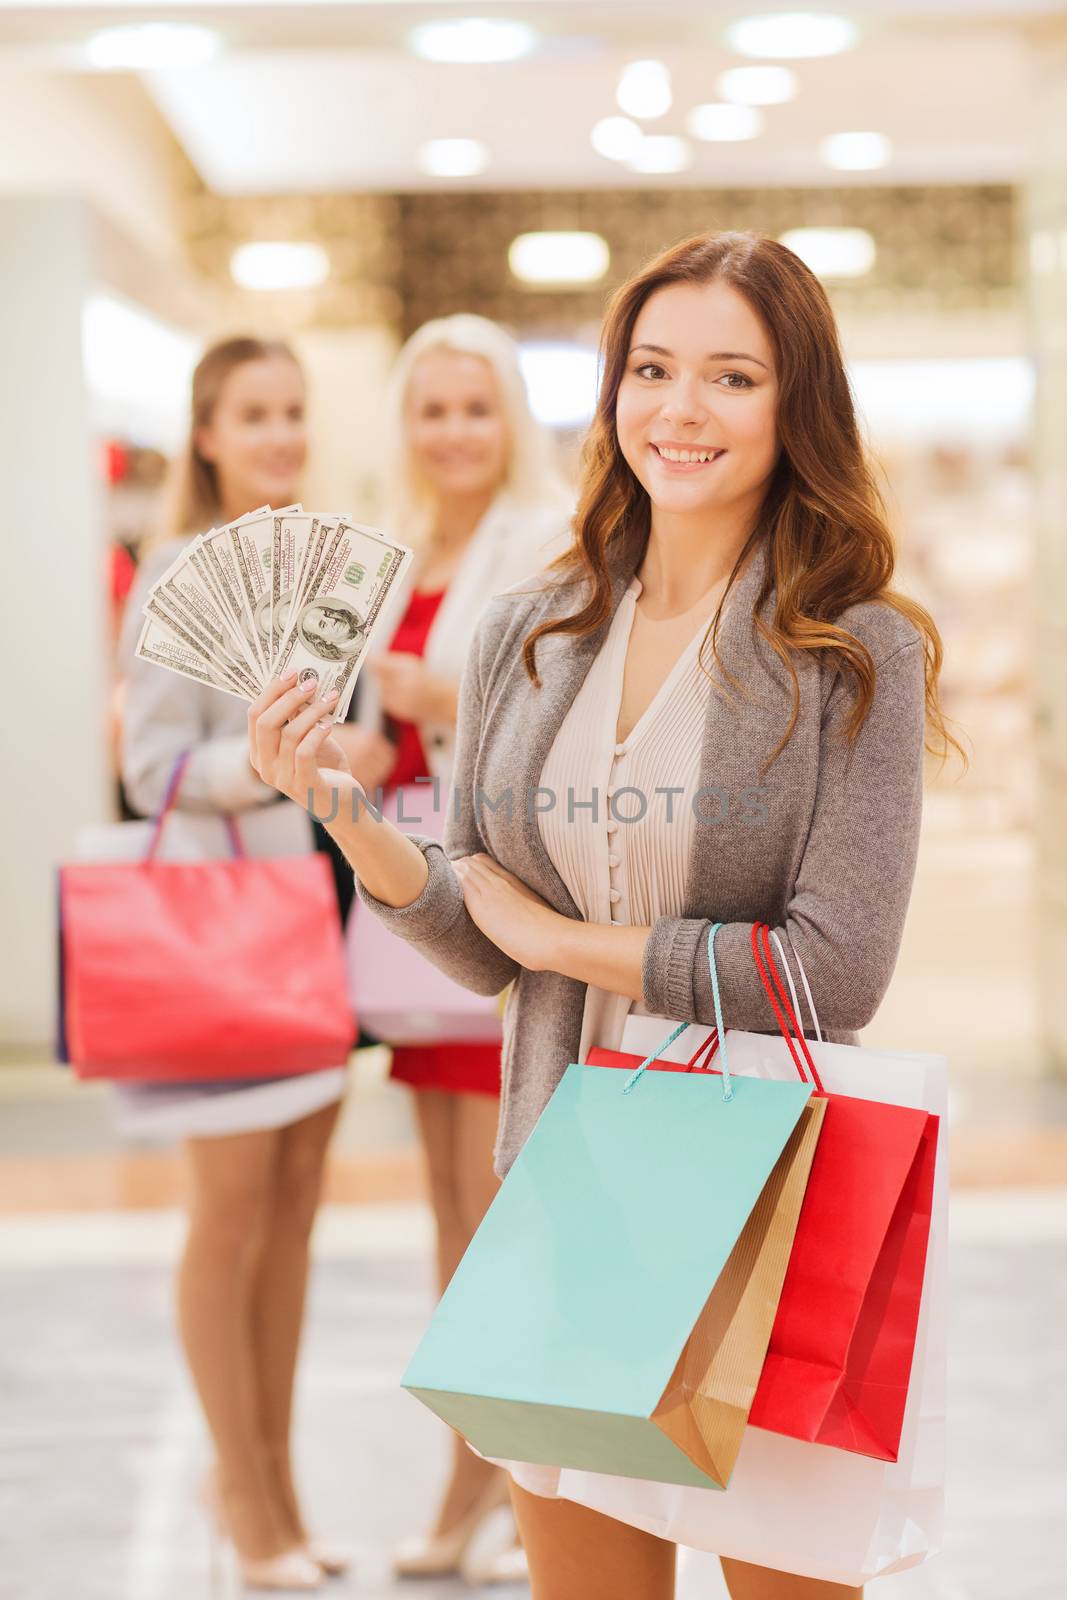 sale, consumerism and people concept - happy young women with shopping bags and dollar cash money in mall